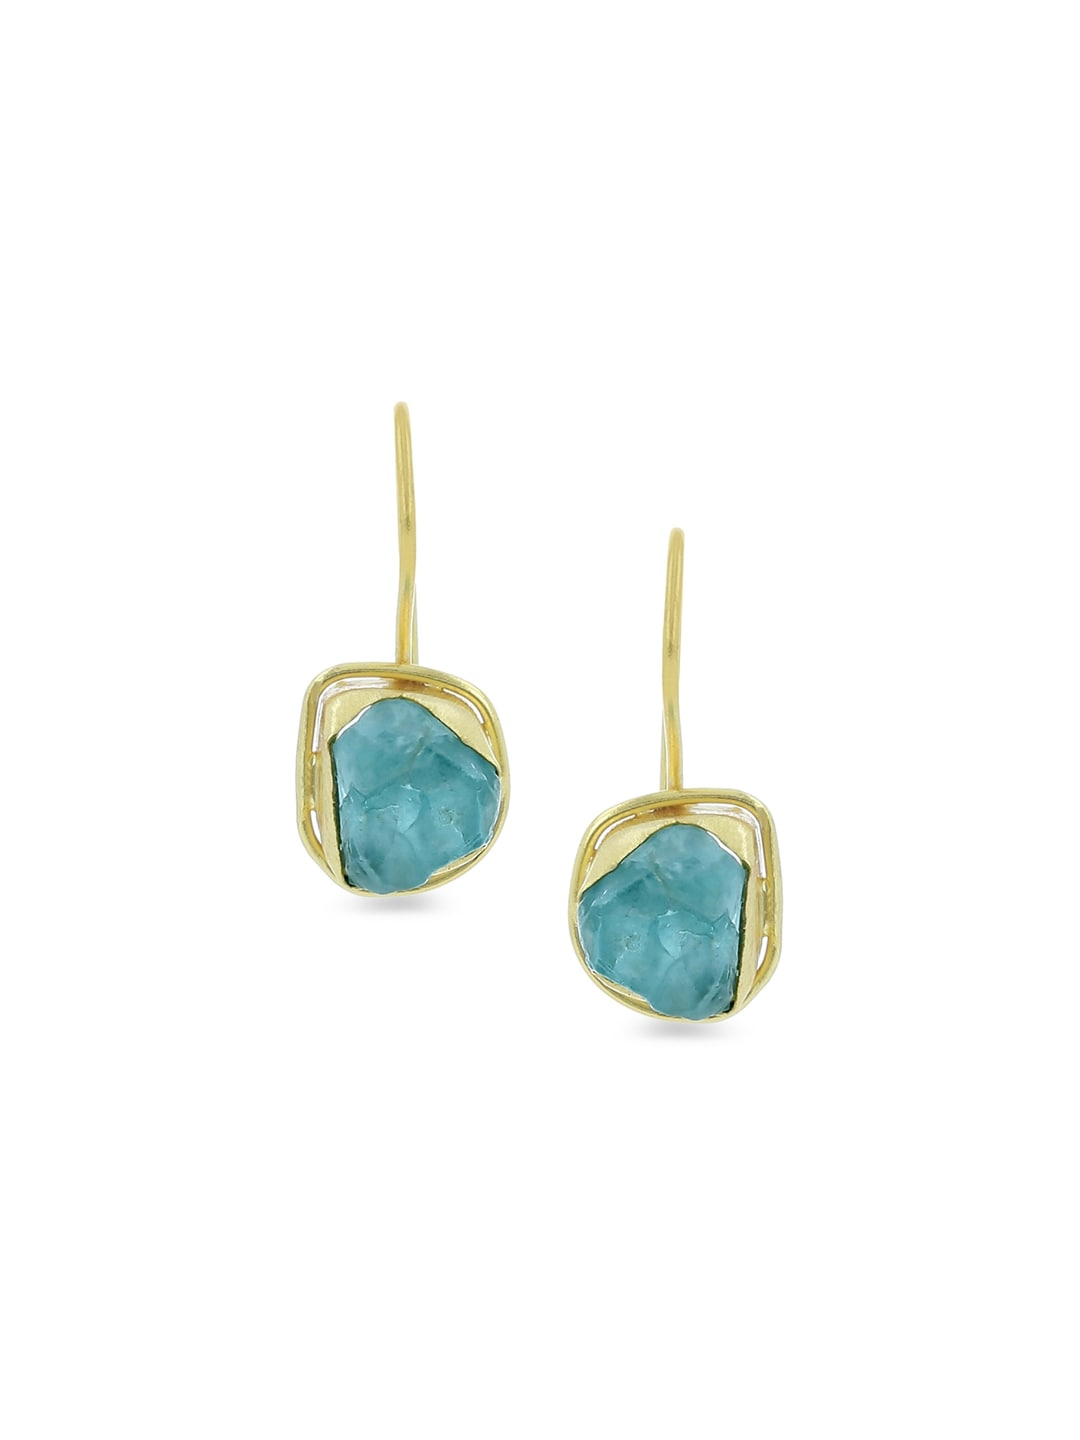 EL REGALO Green Amber Contemporary Drop Earrings - for Women and Girls
Style ID: 17119252